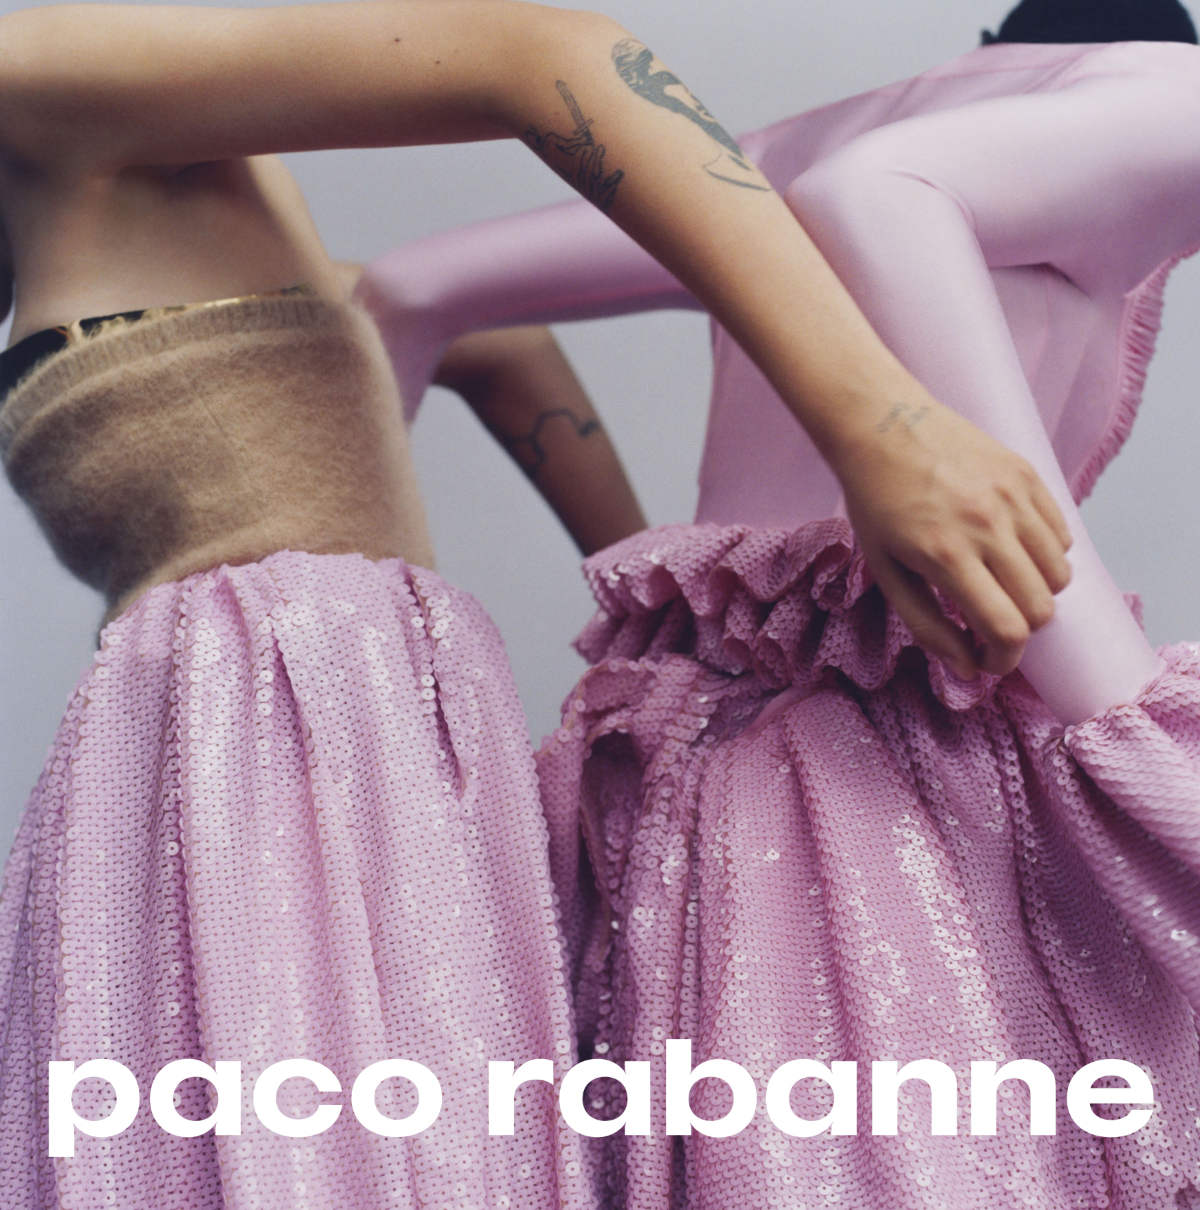 Paco Rabanne Presents Its New Fall-Winter 22 Campaign: Sensory Forms